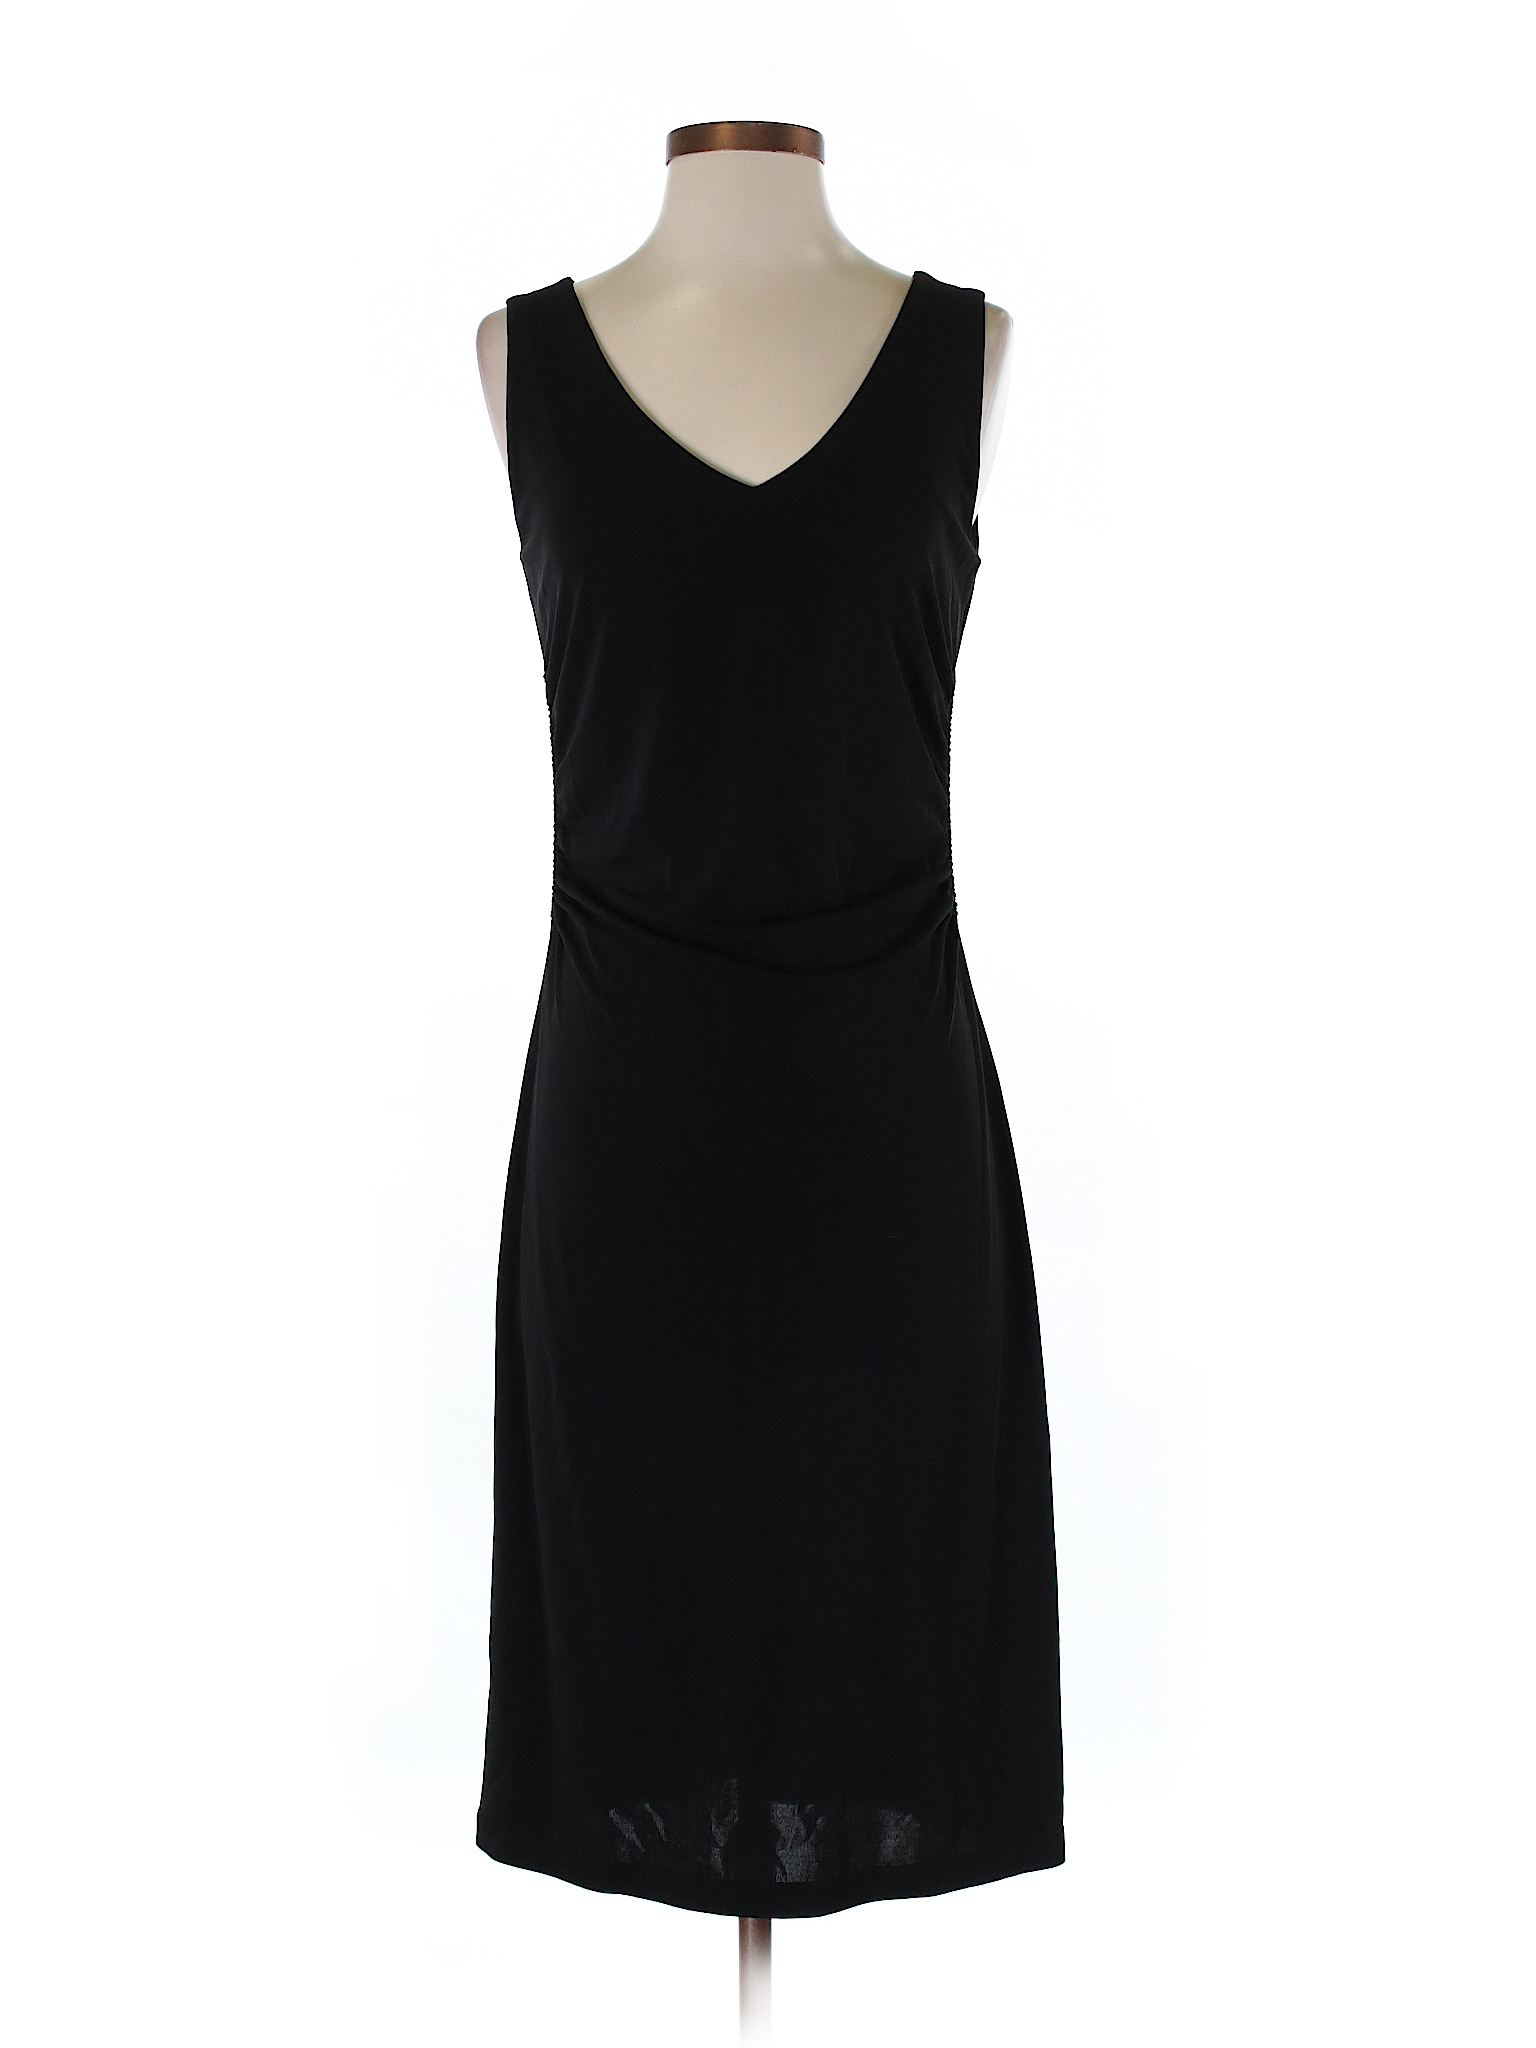 Ideology Solid Black Casual Dress Size S - 80% off | thredUP